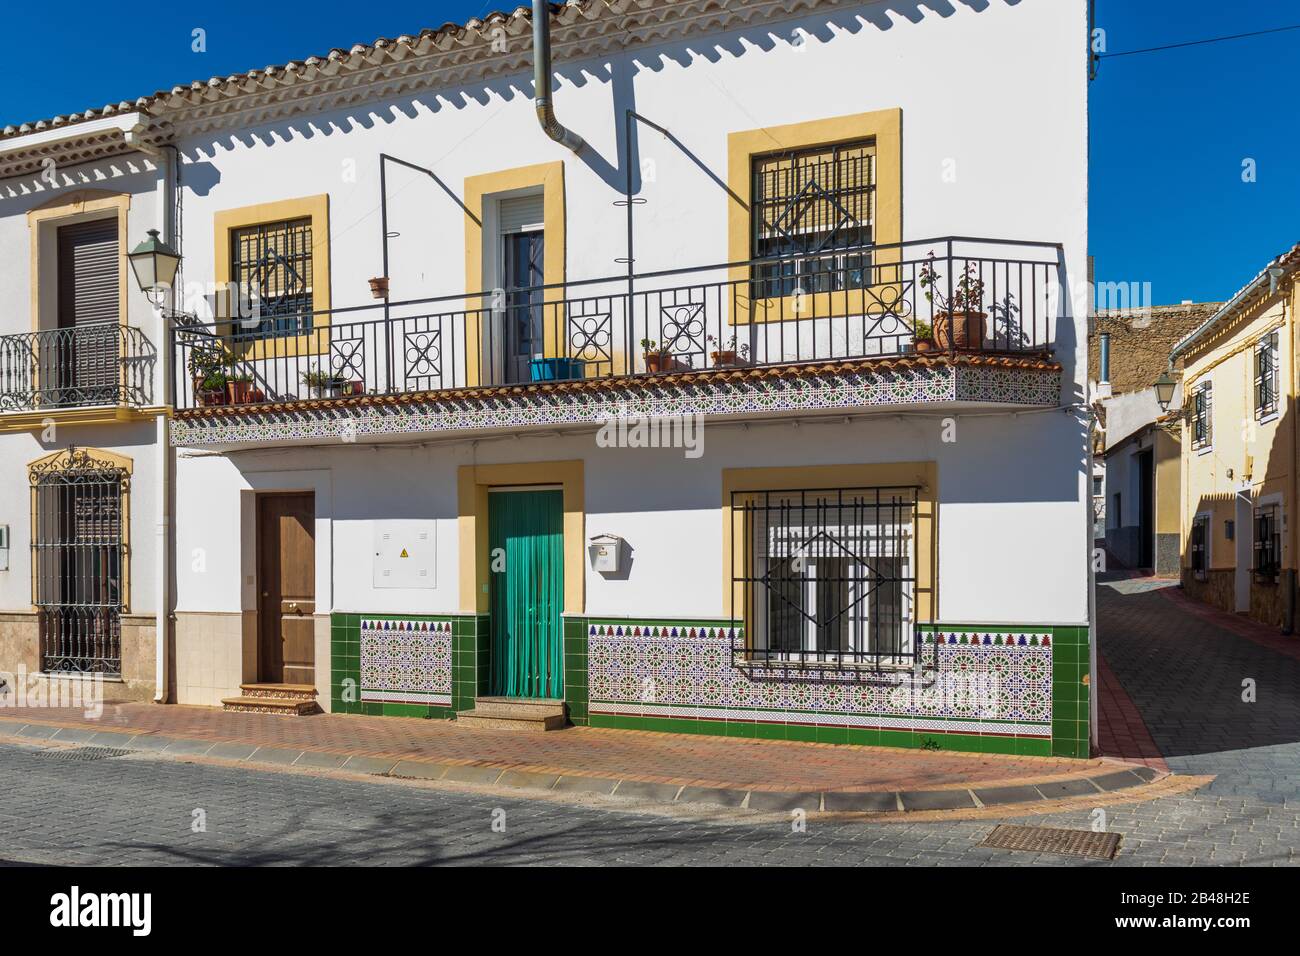 Traditional Spanish Rural House in El Contador, A Small town In Andalusia Spain Stock Photo